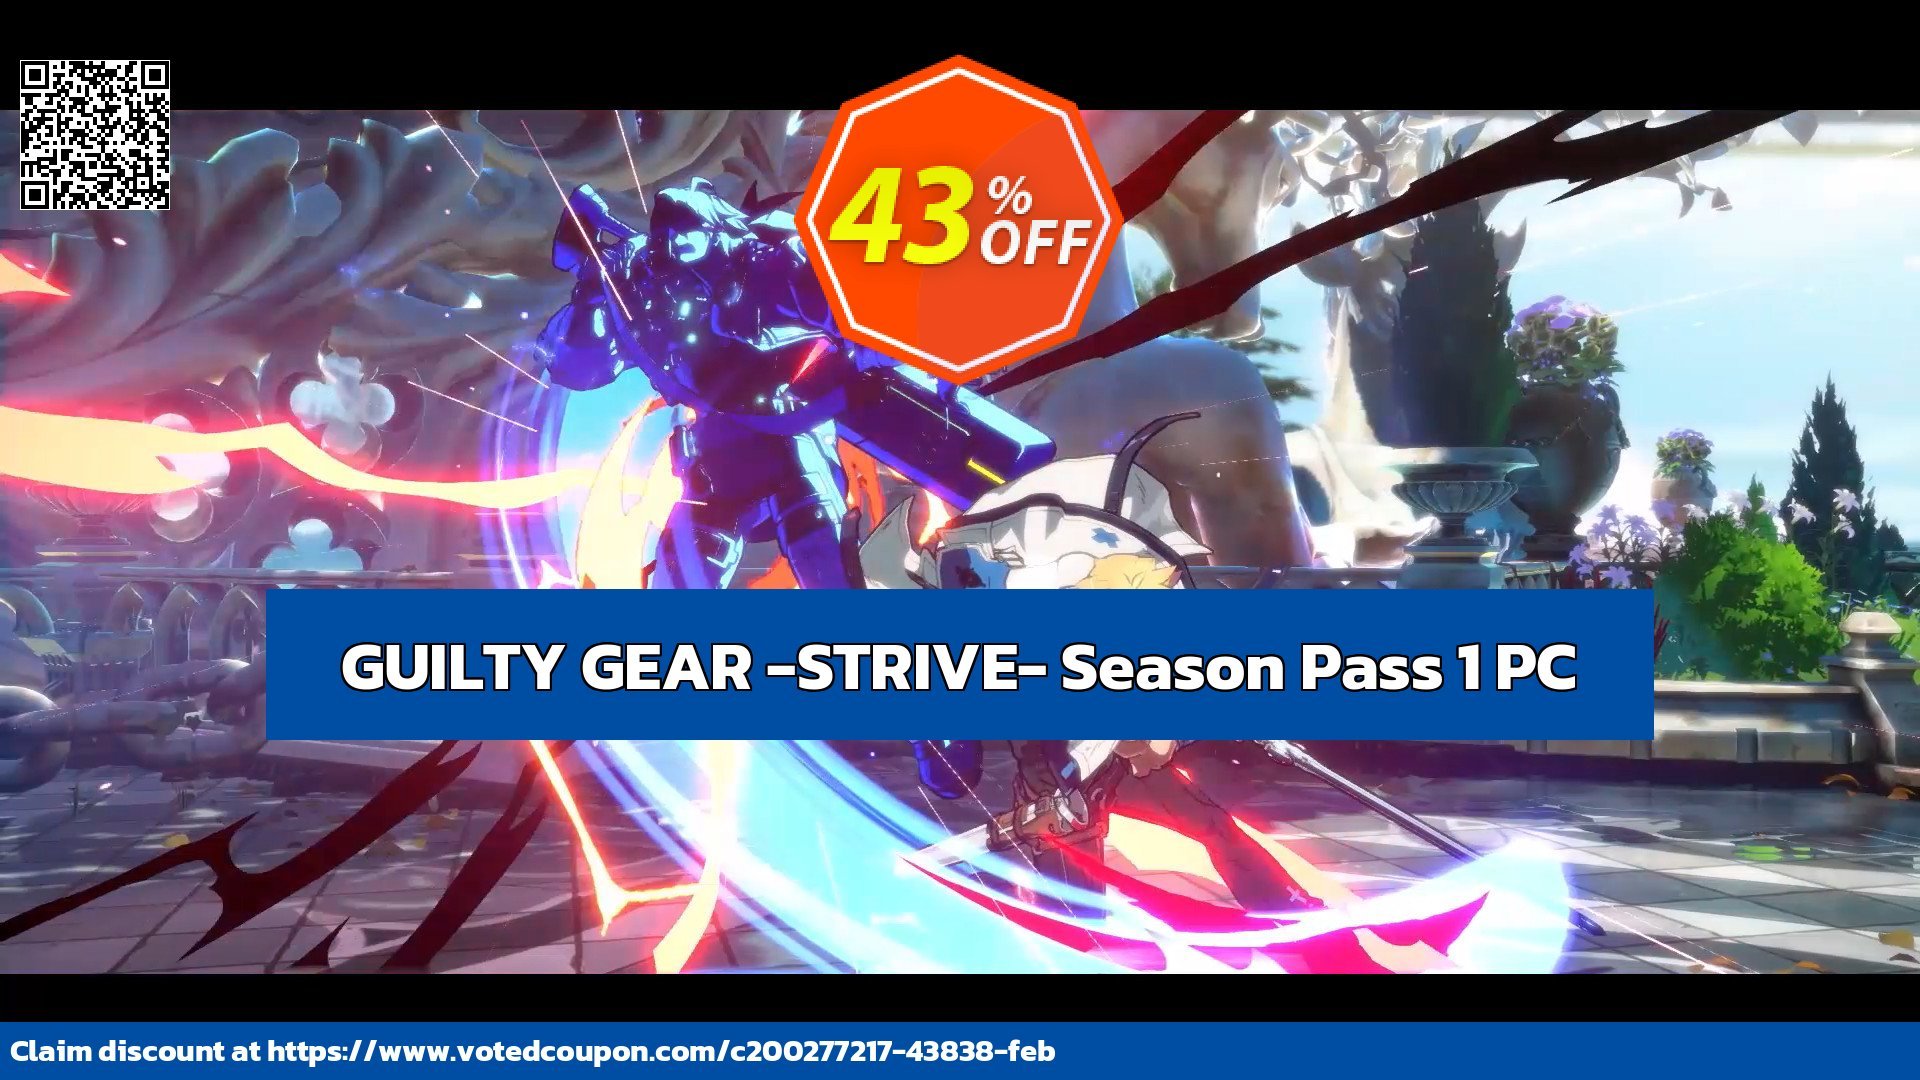 GUILTY GEAR -STRIVE- Season Pass 1 PC Coupon Code May 2024, 43% OFF - VotedCoupon